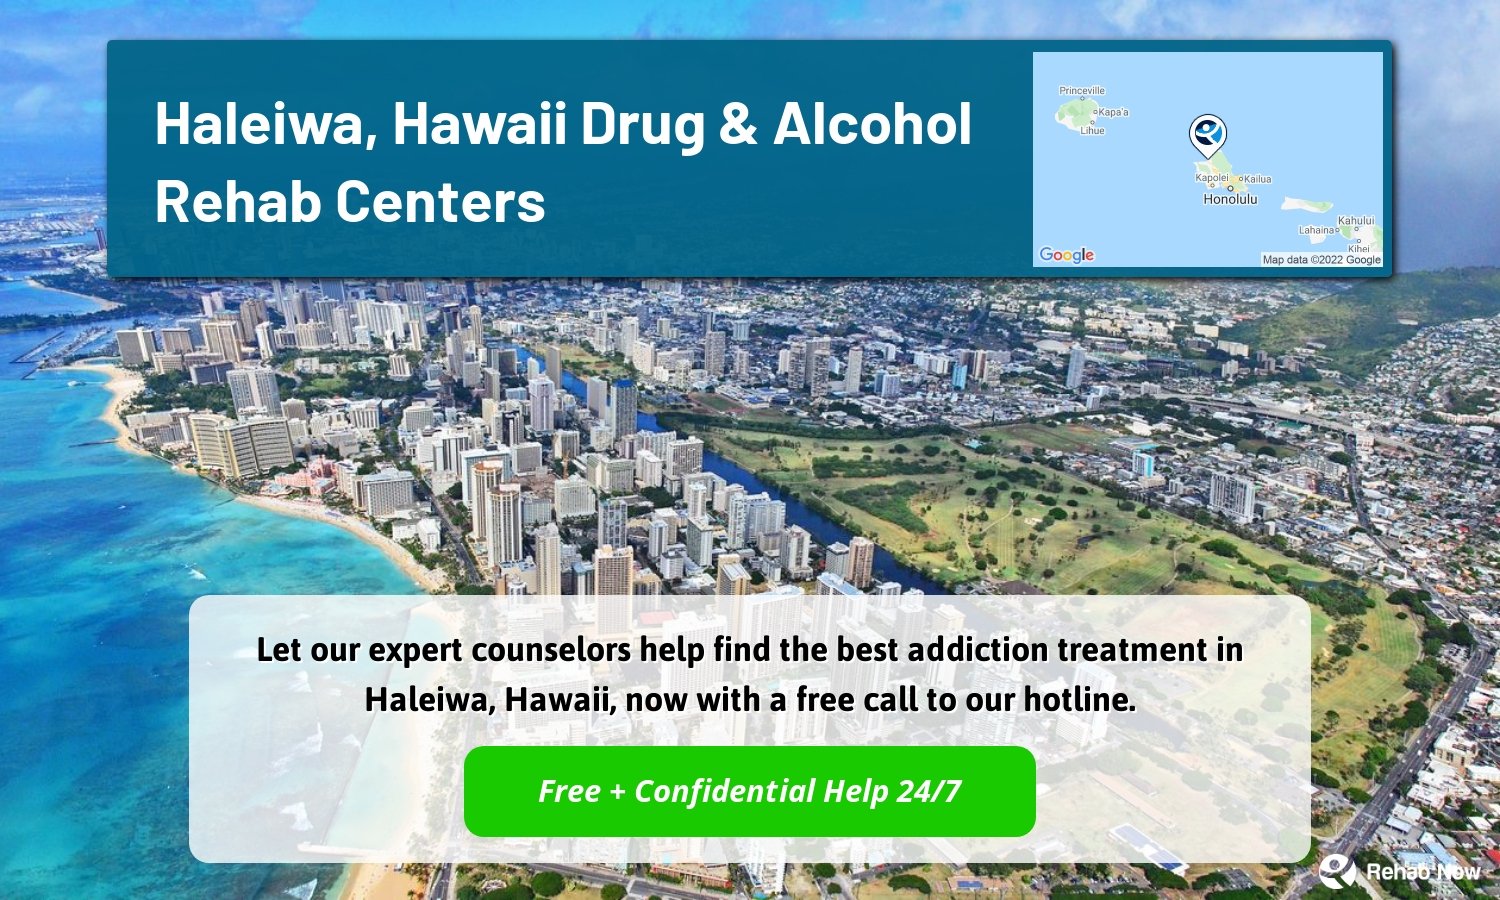 Let our expert counselors help find the best addiction treatment in Haleiwa, Hawaii, now with a free call to our hotline.